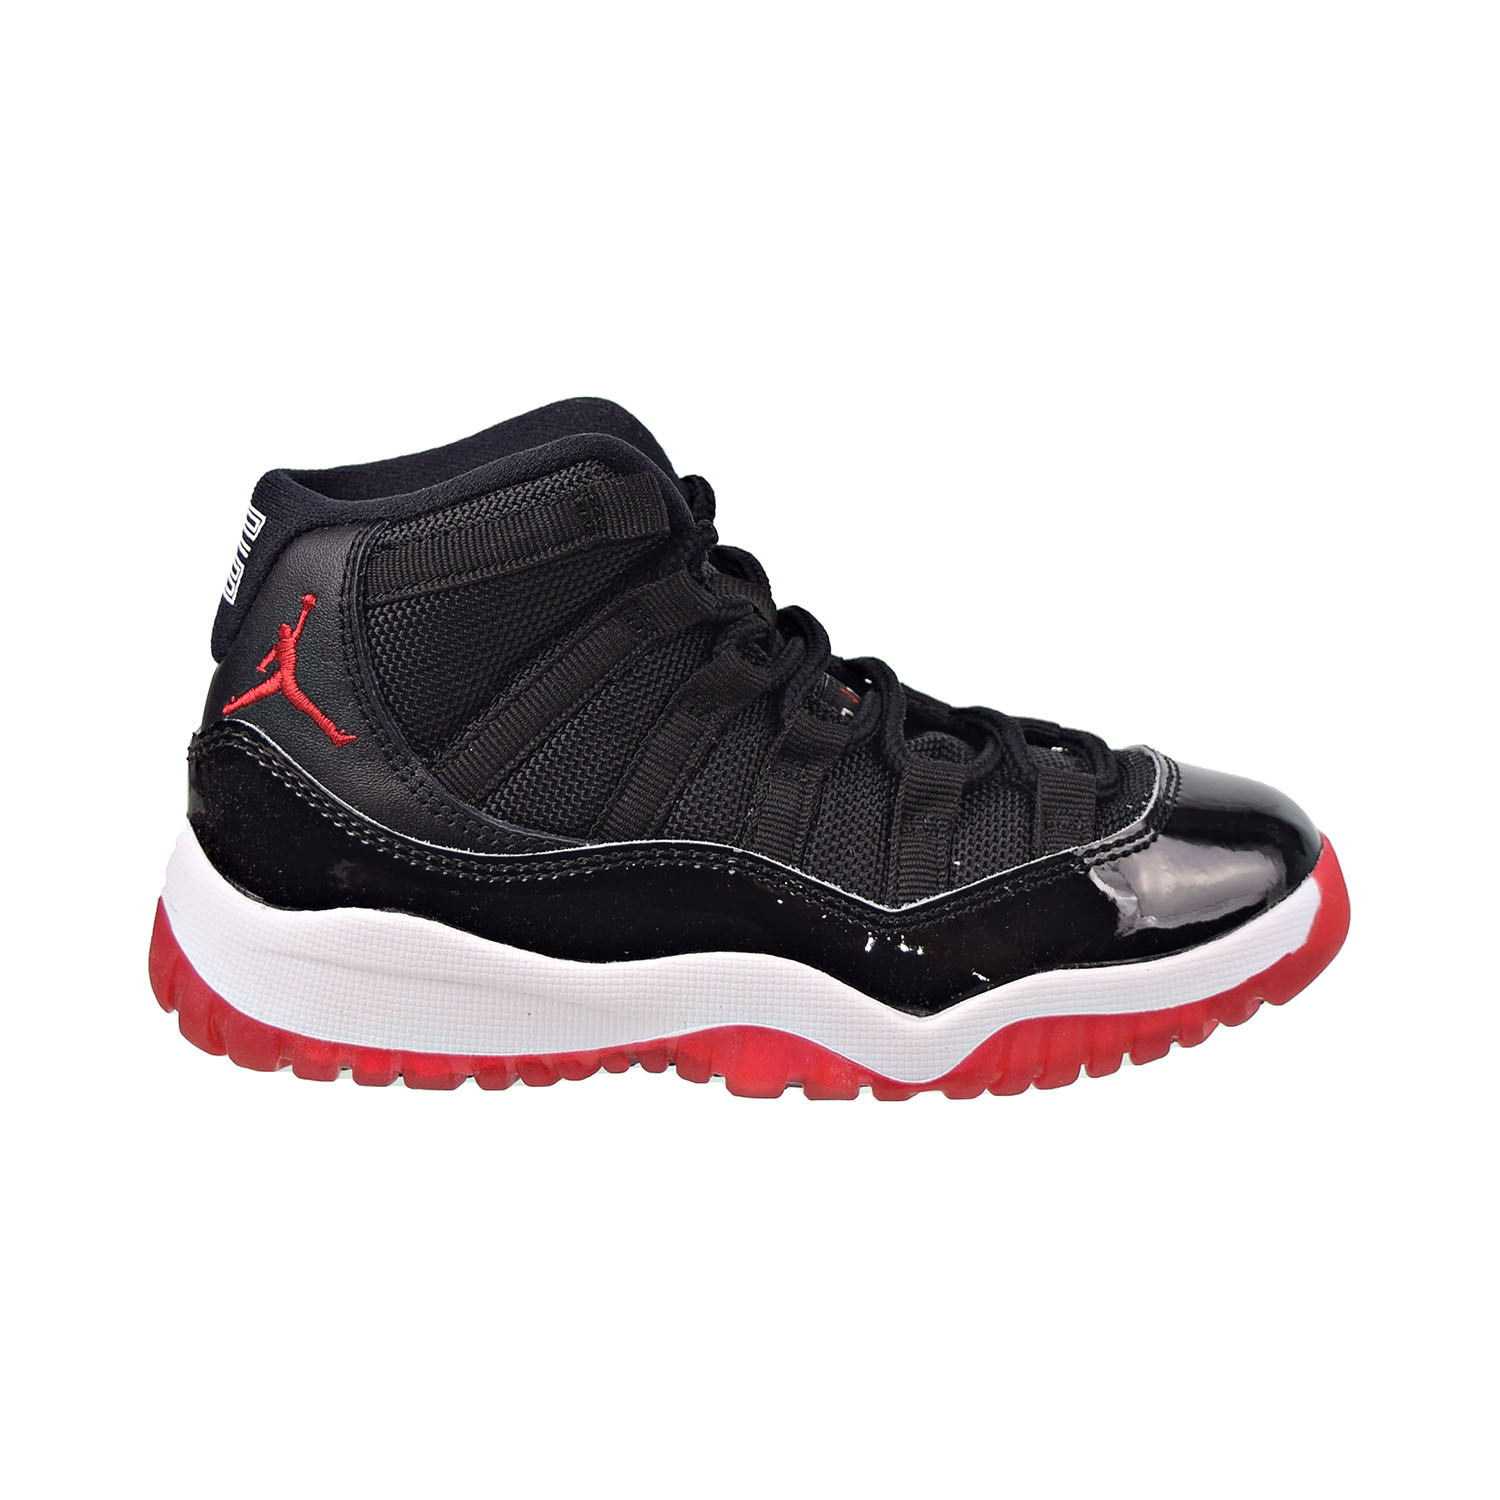 bred 11s black and red